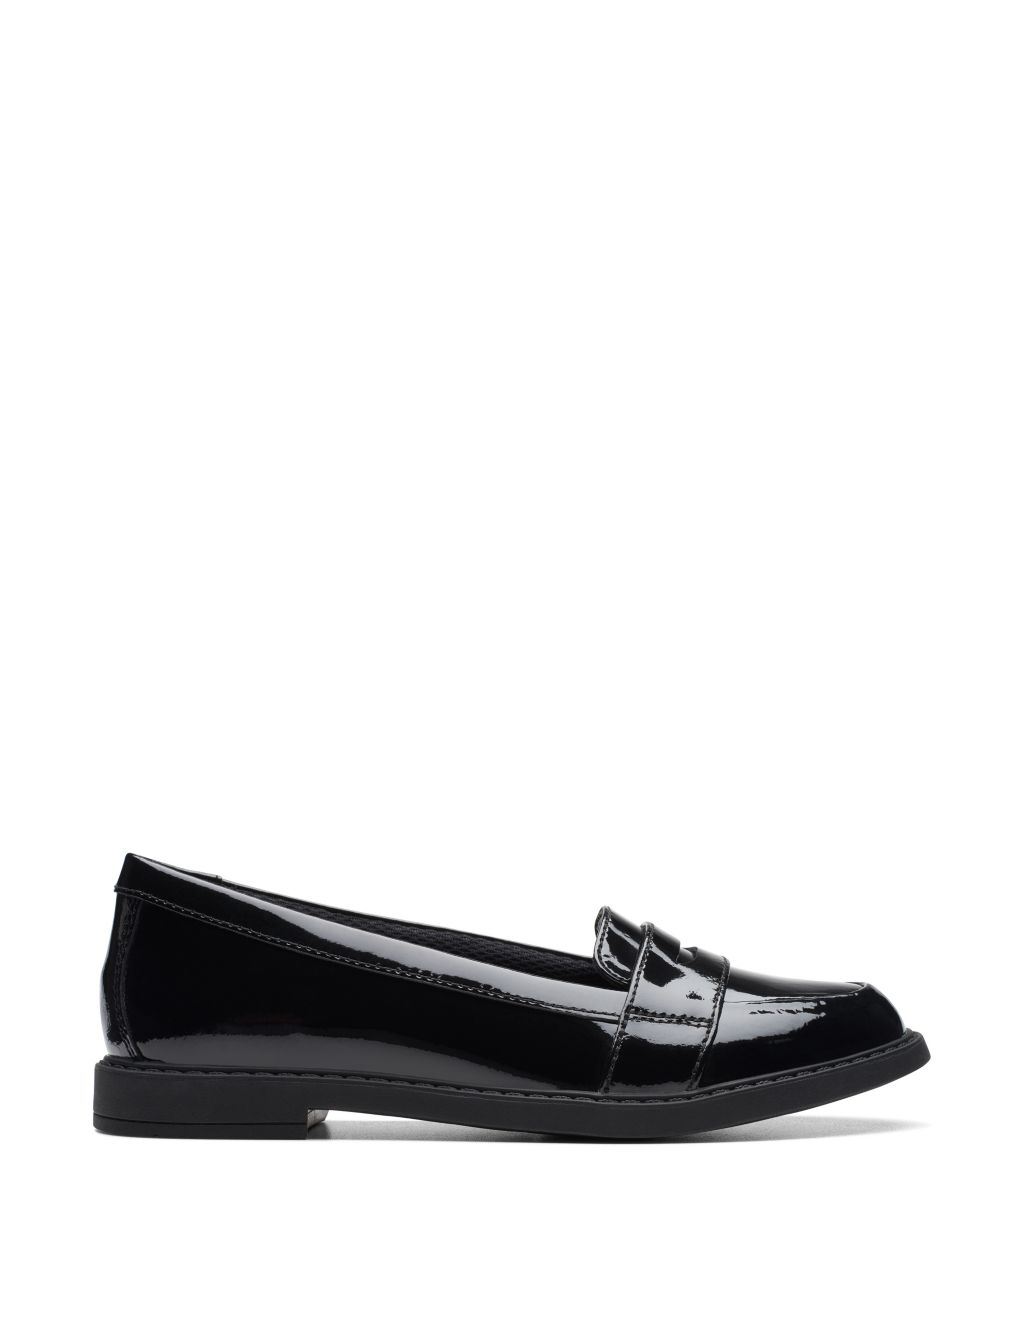 Loafers for School | M&S